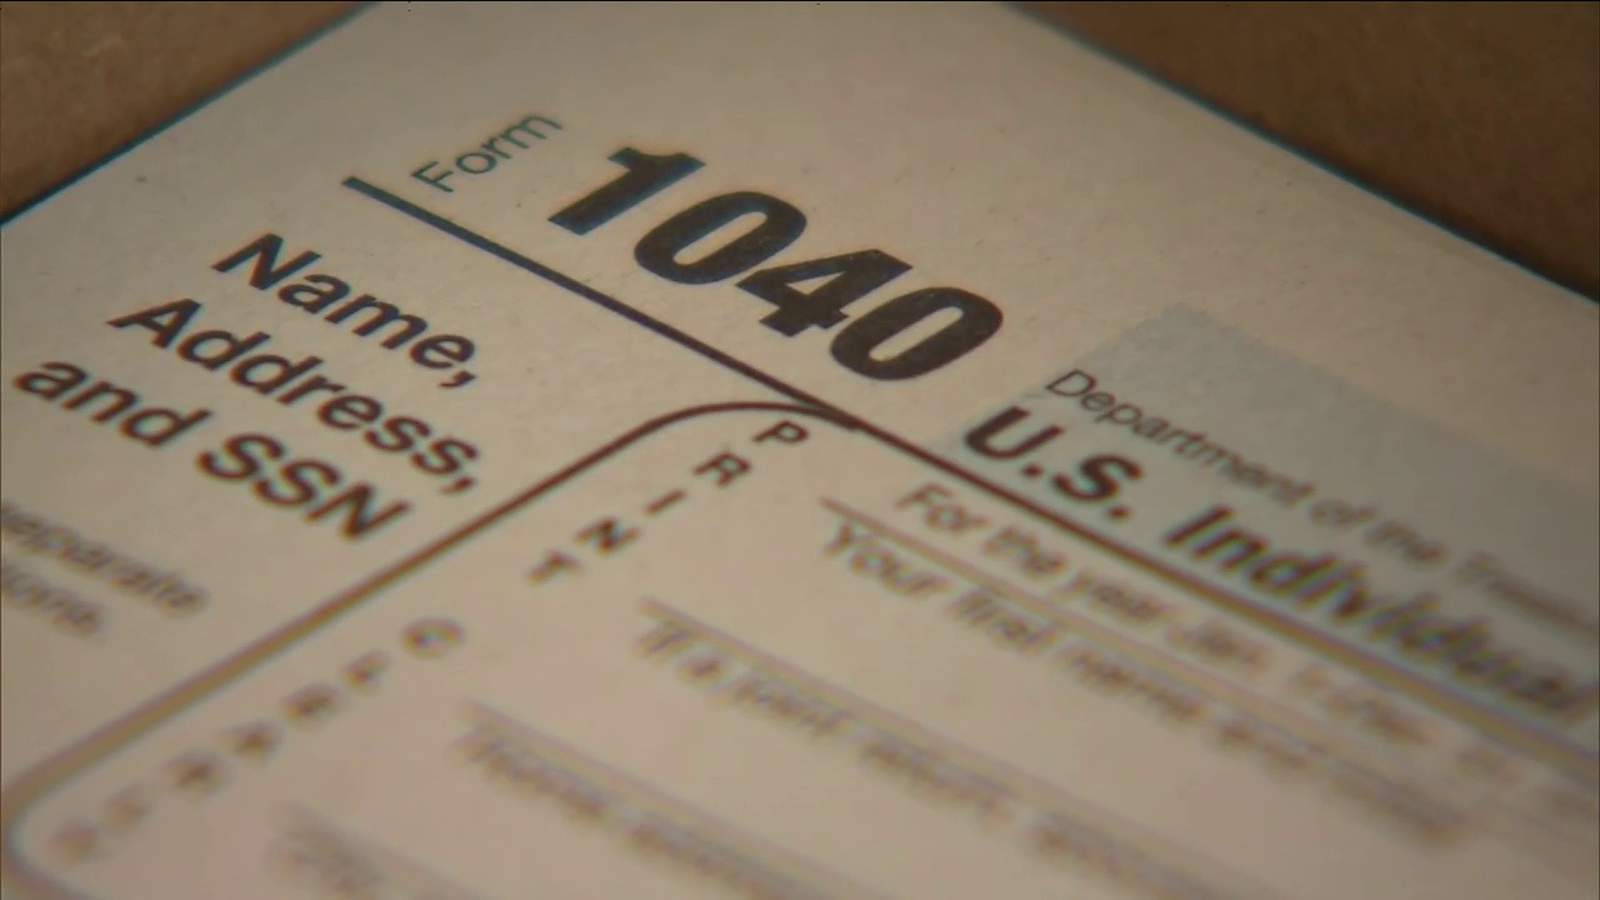 Still waiting on your tax refund? Here’s what you should do